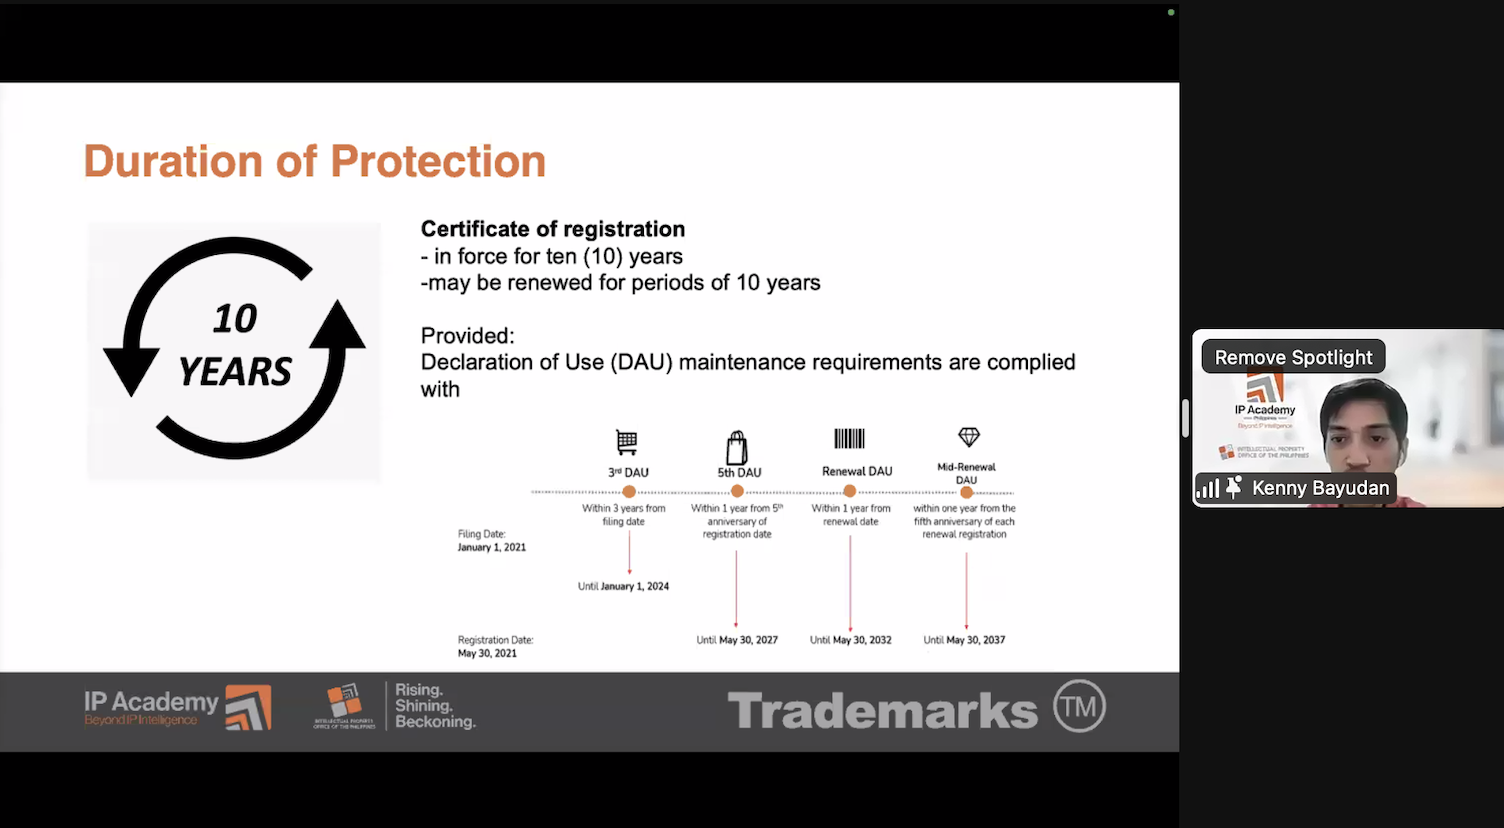 Image: Dr Bayudan discussing the duration of trademark protection, maintenance and renewal